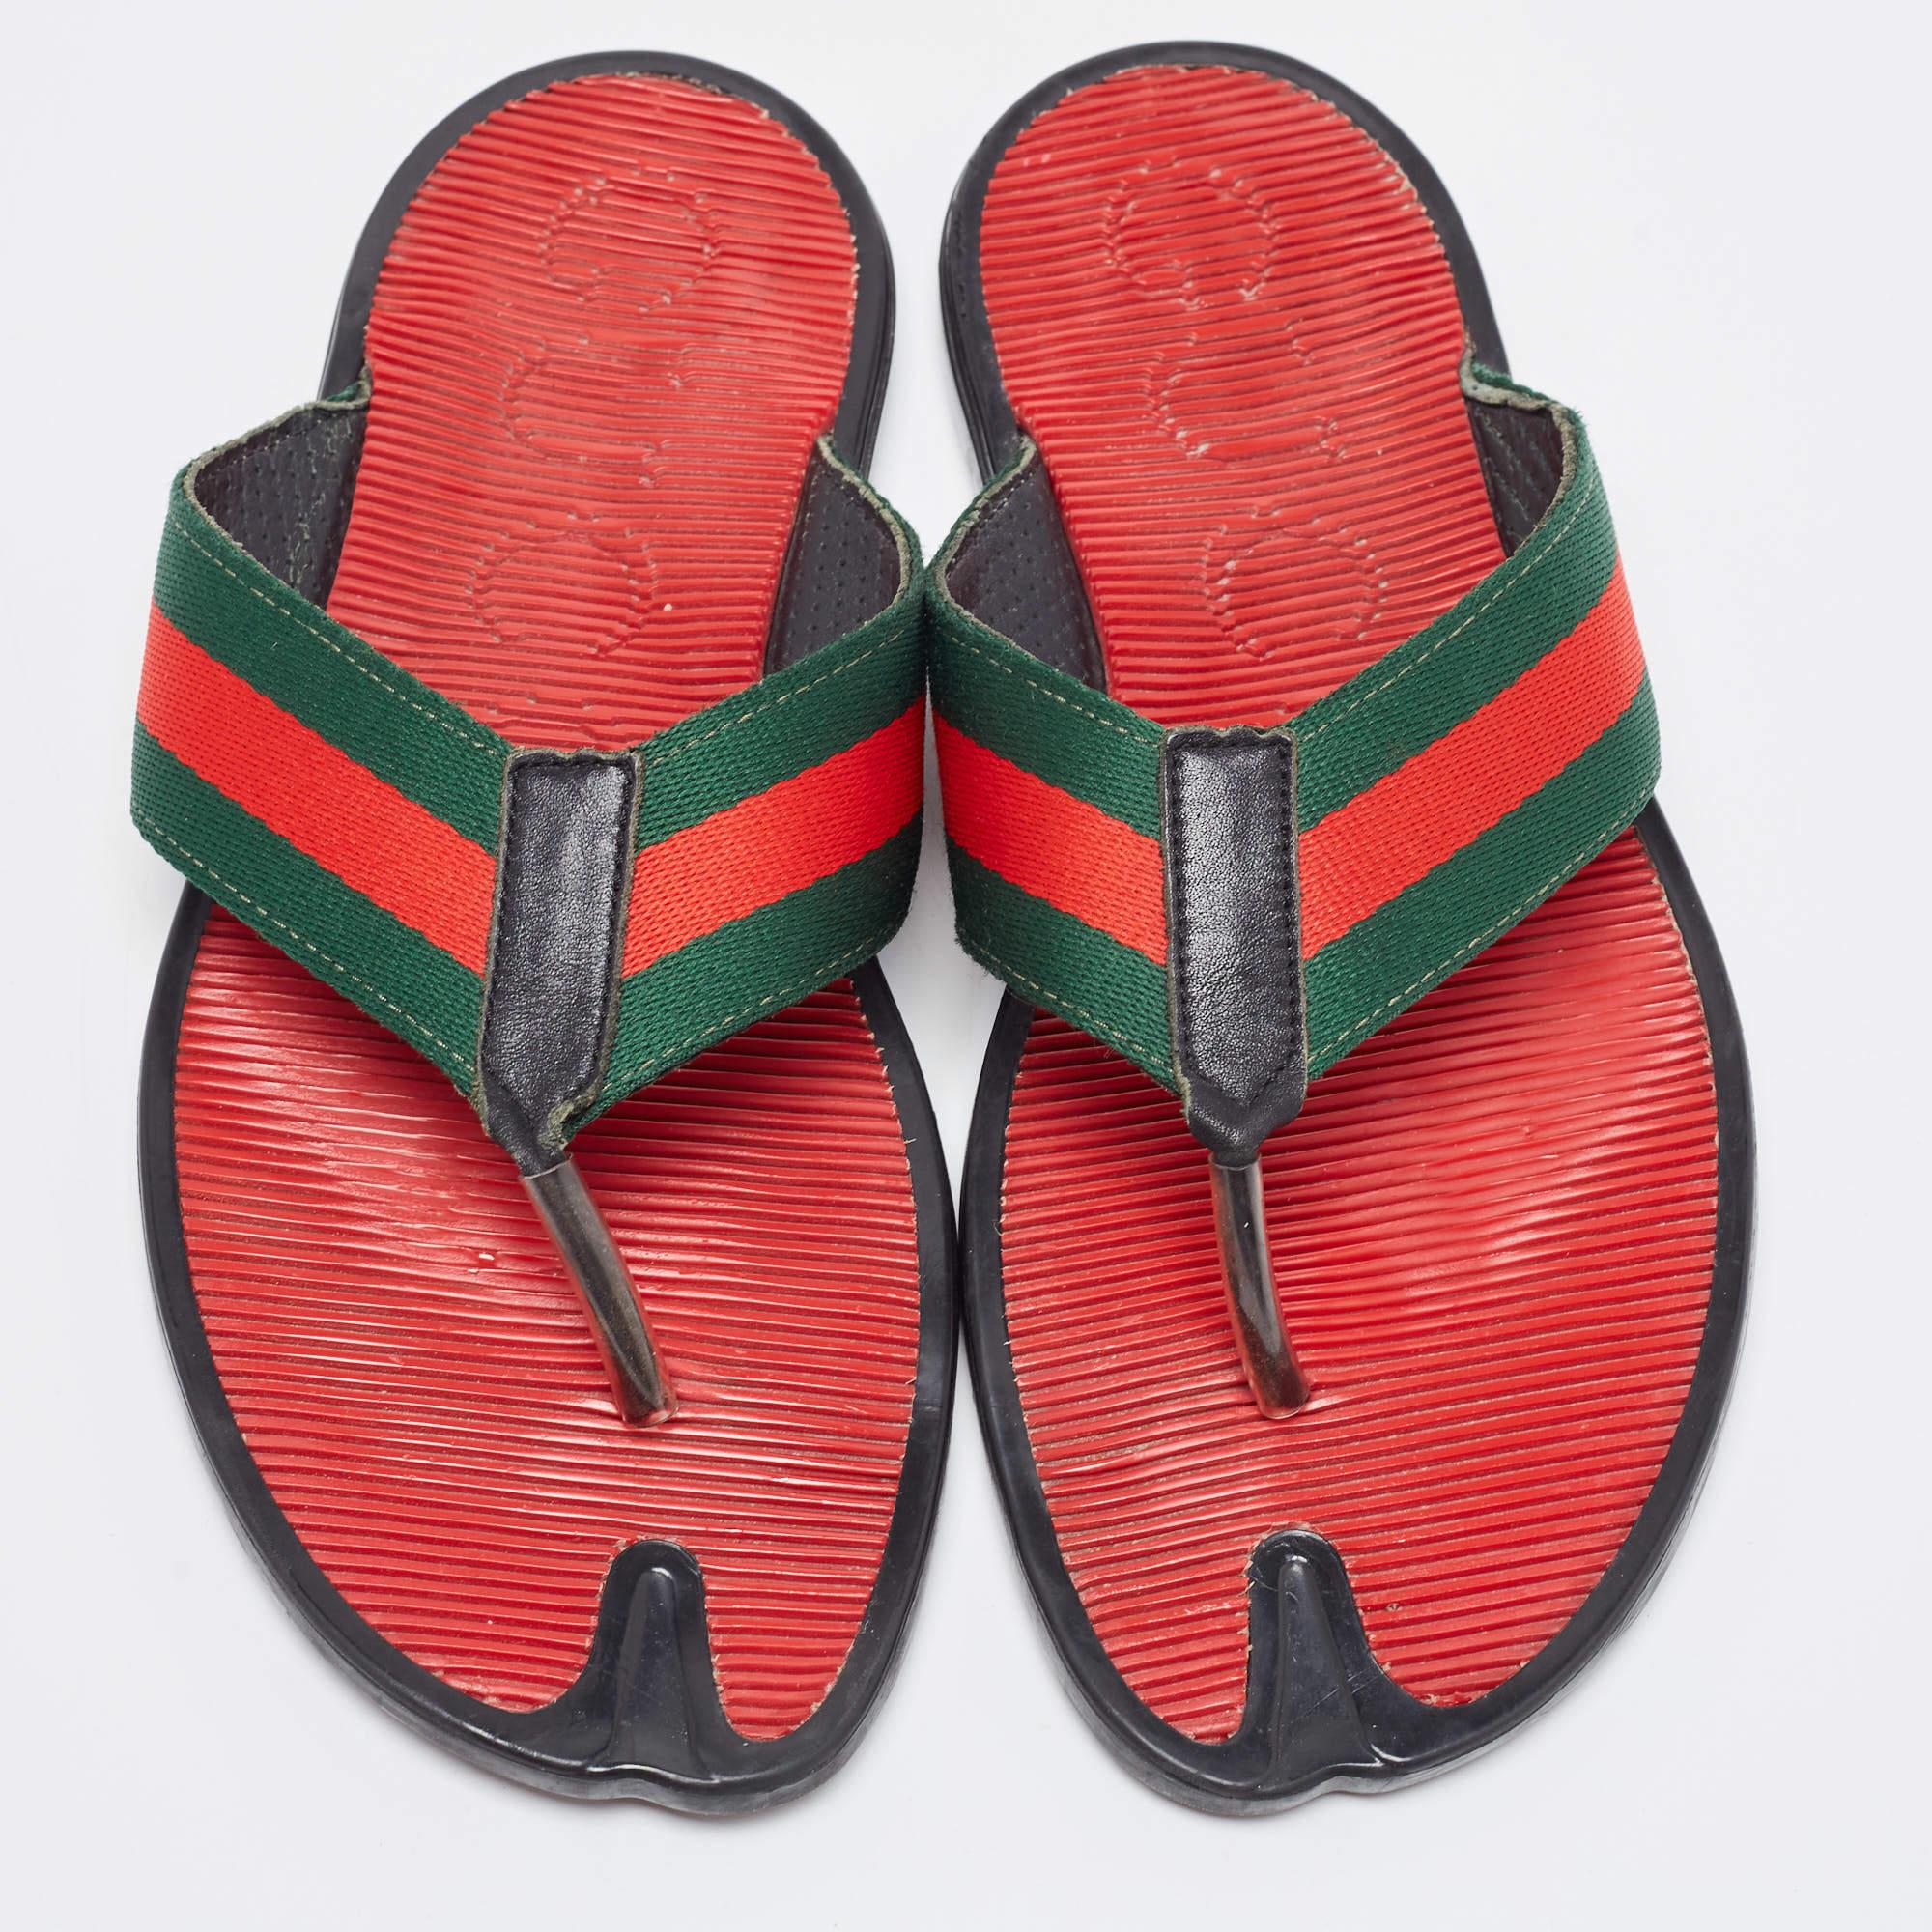 Gucci's thong slides for men have the iconic Web strap on the uppers. They're perfect for the beach, vacation days, or everyday use.

